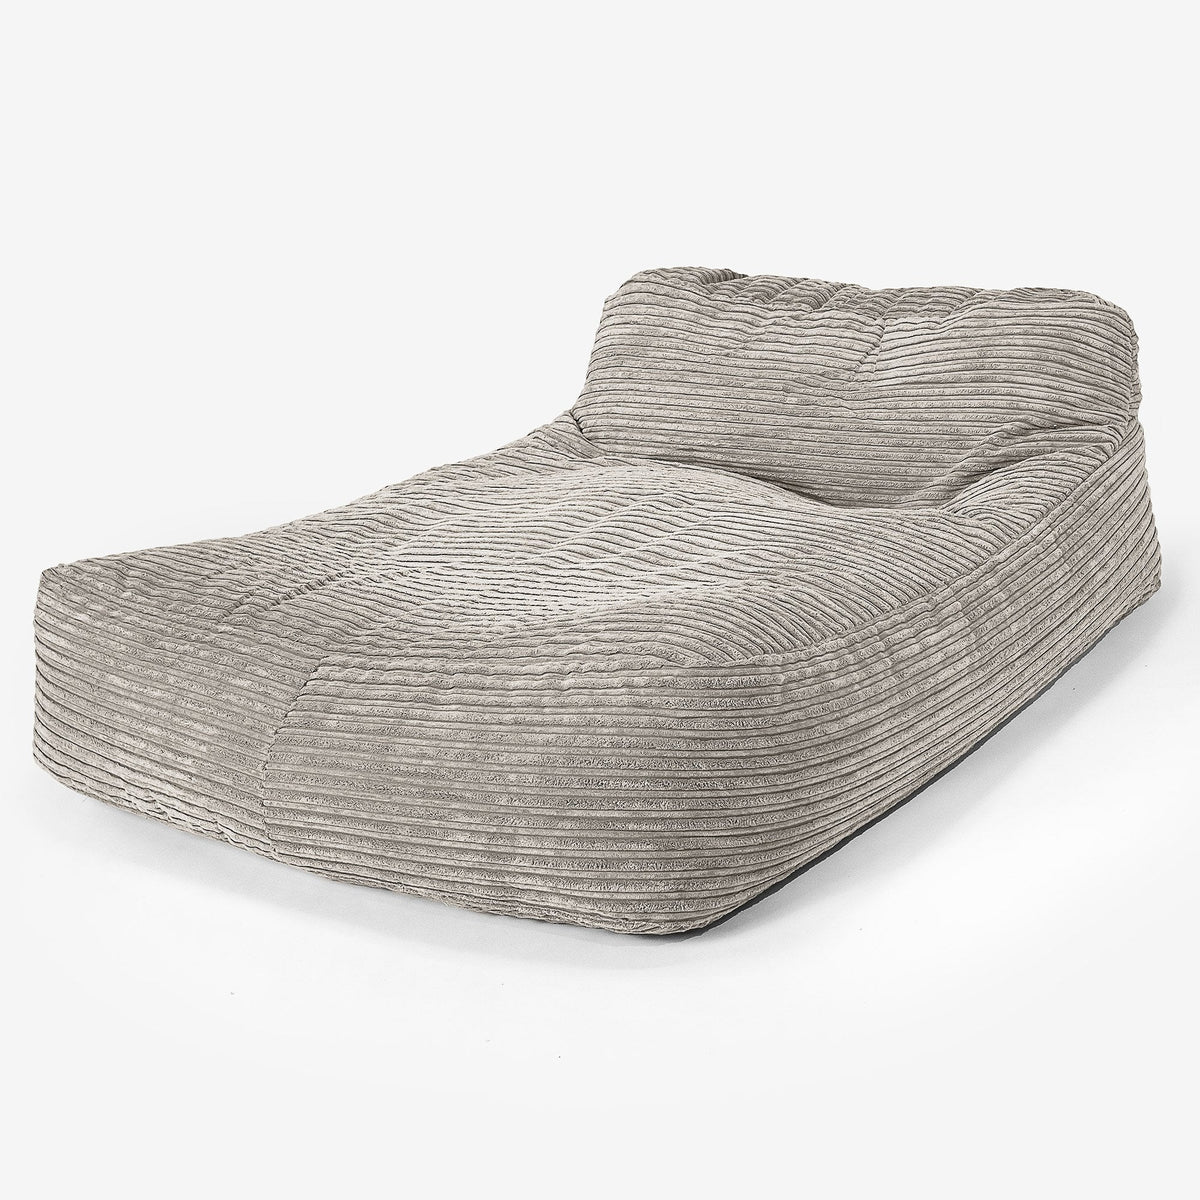 Lounge Pug, Pouf Chaise Longue, 2 Persone, Velluto a Coste